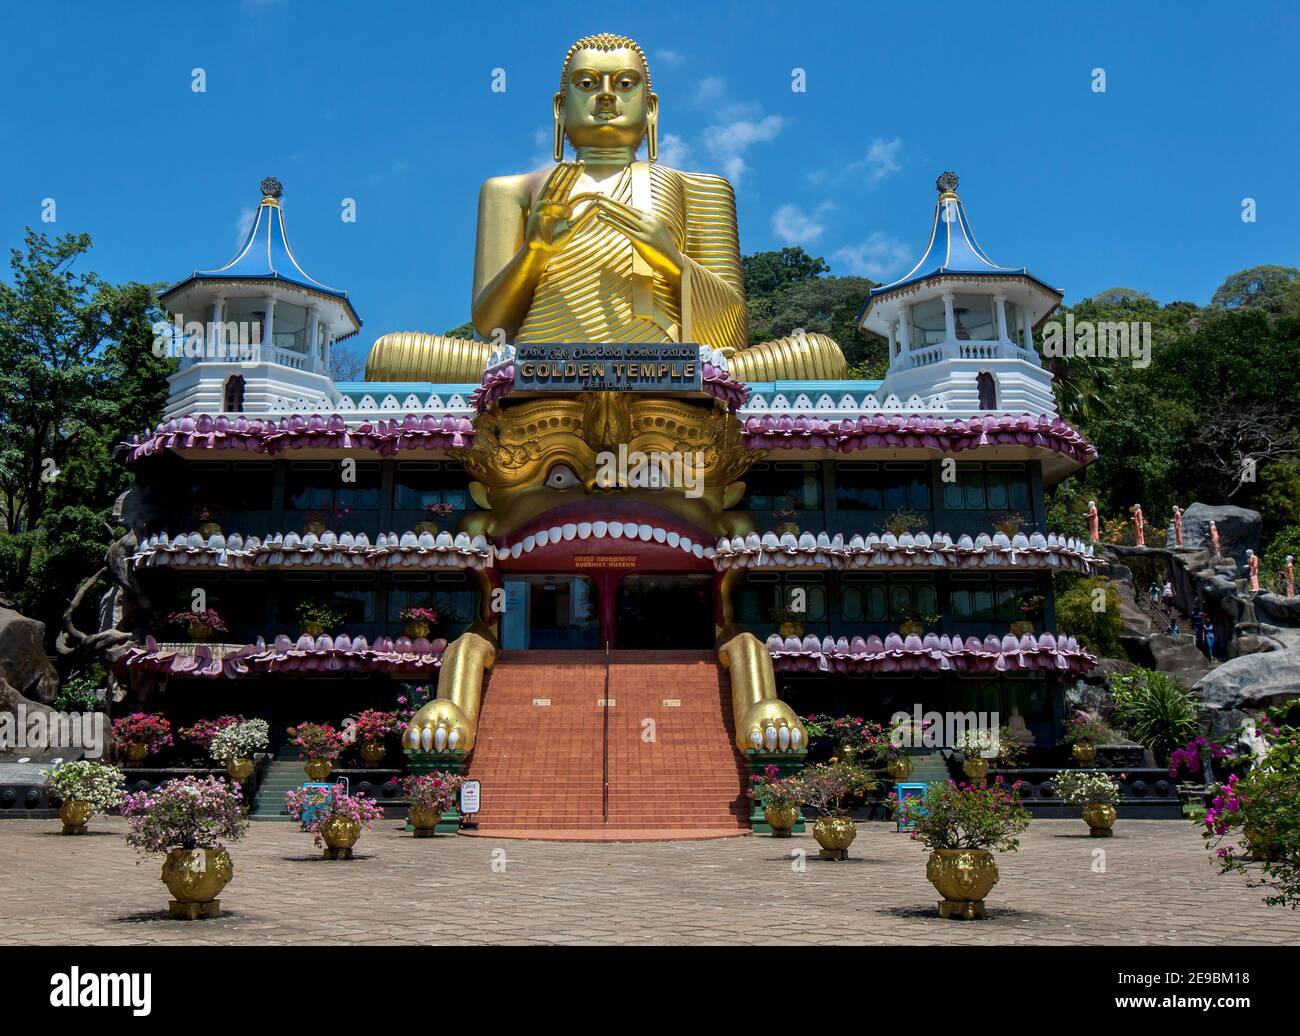 The Golden Temple which features a 30 metre high seated Buddha statue at Dambulla in Sri Lanka. The statue is designed in the dhammachakka mudra. Stock Photo